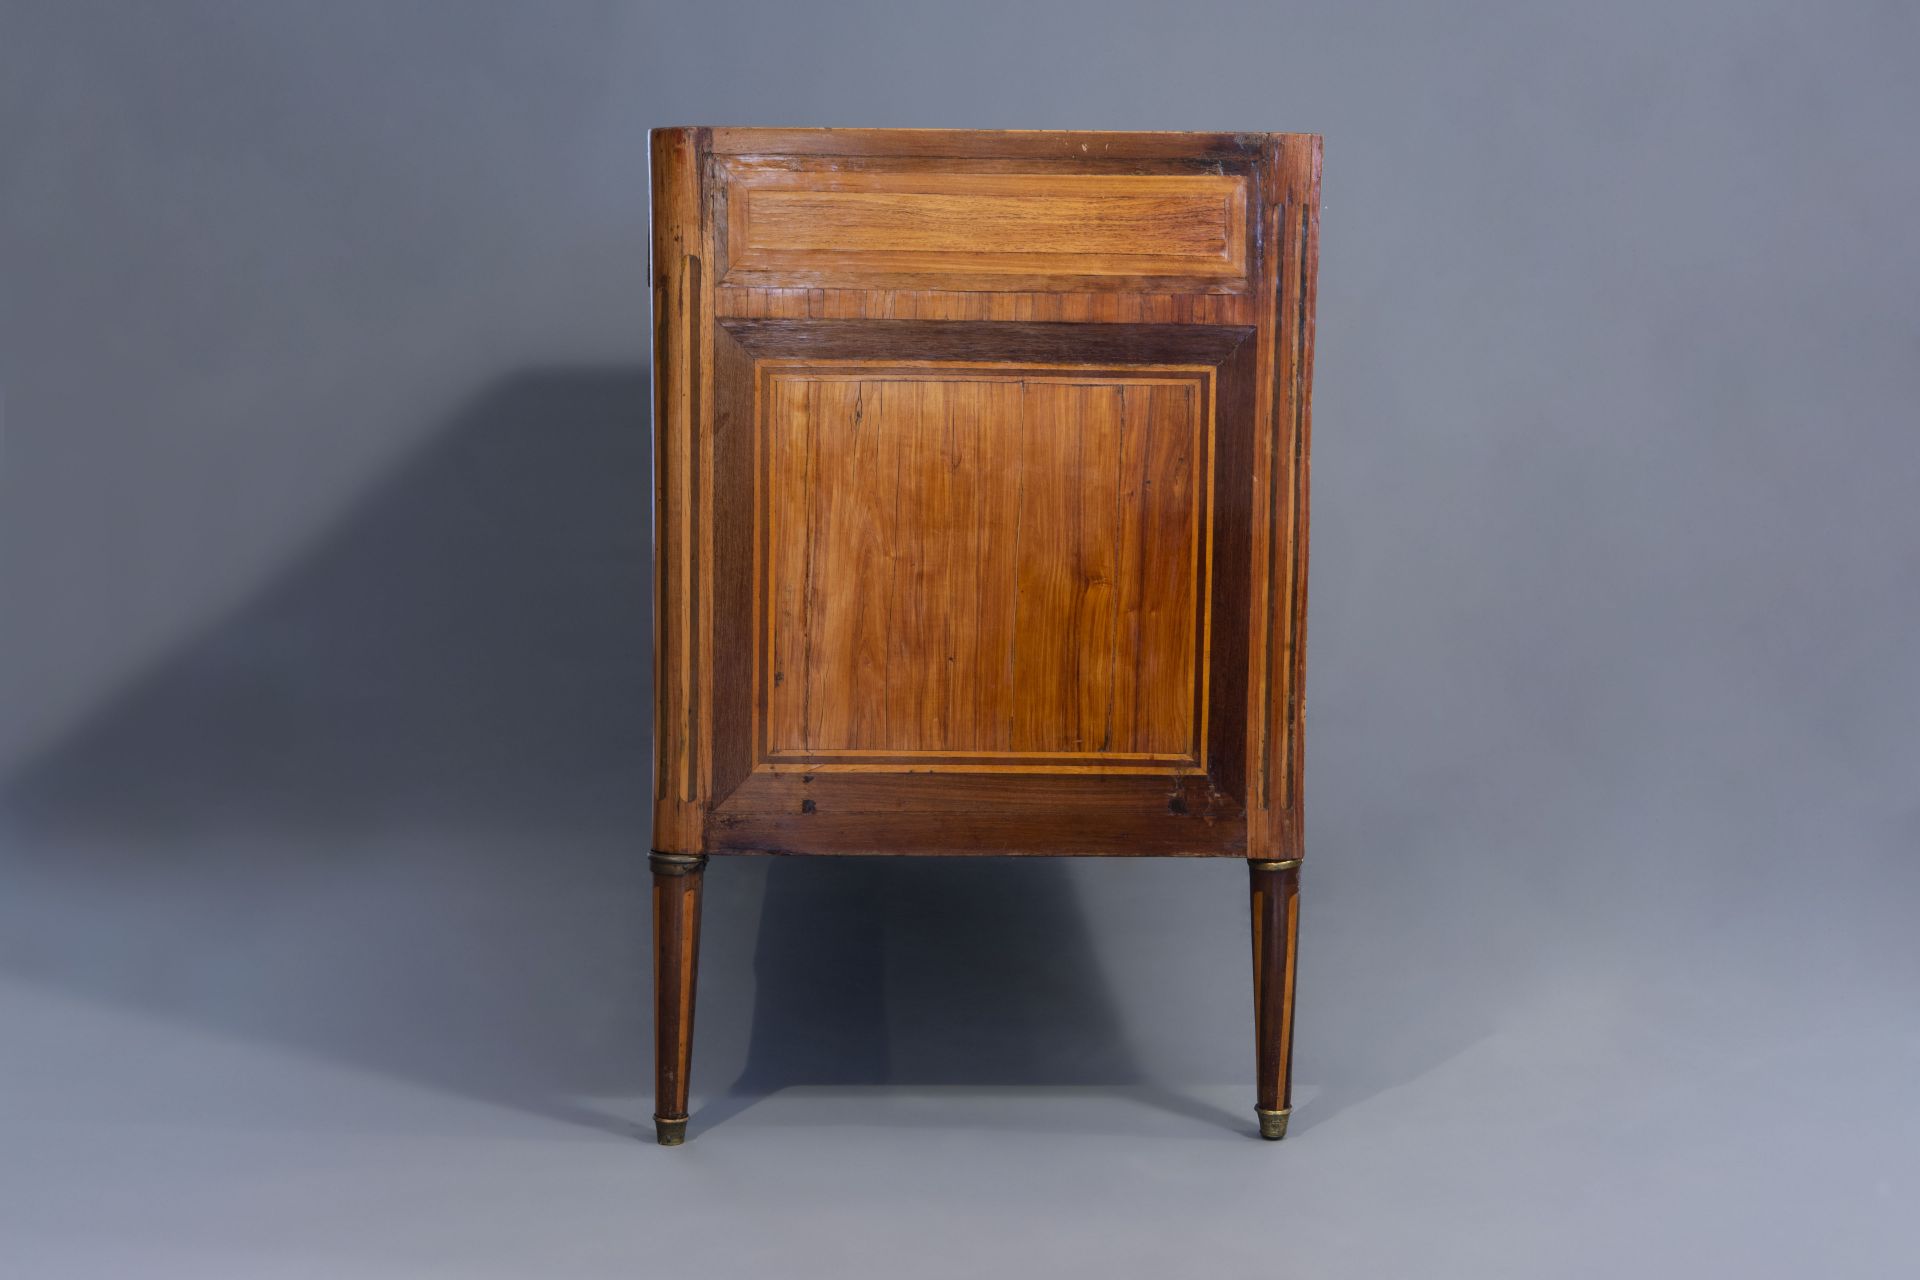 A French mahogany veneered Louis XVI chest of drawers with marble top, late 18th C. - Image 3 of 11